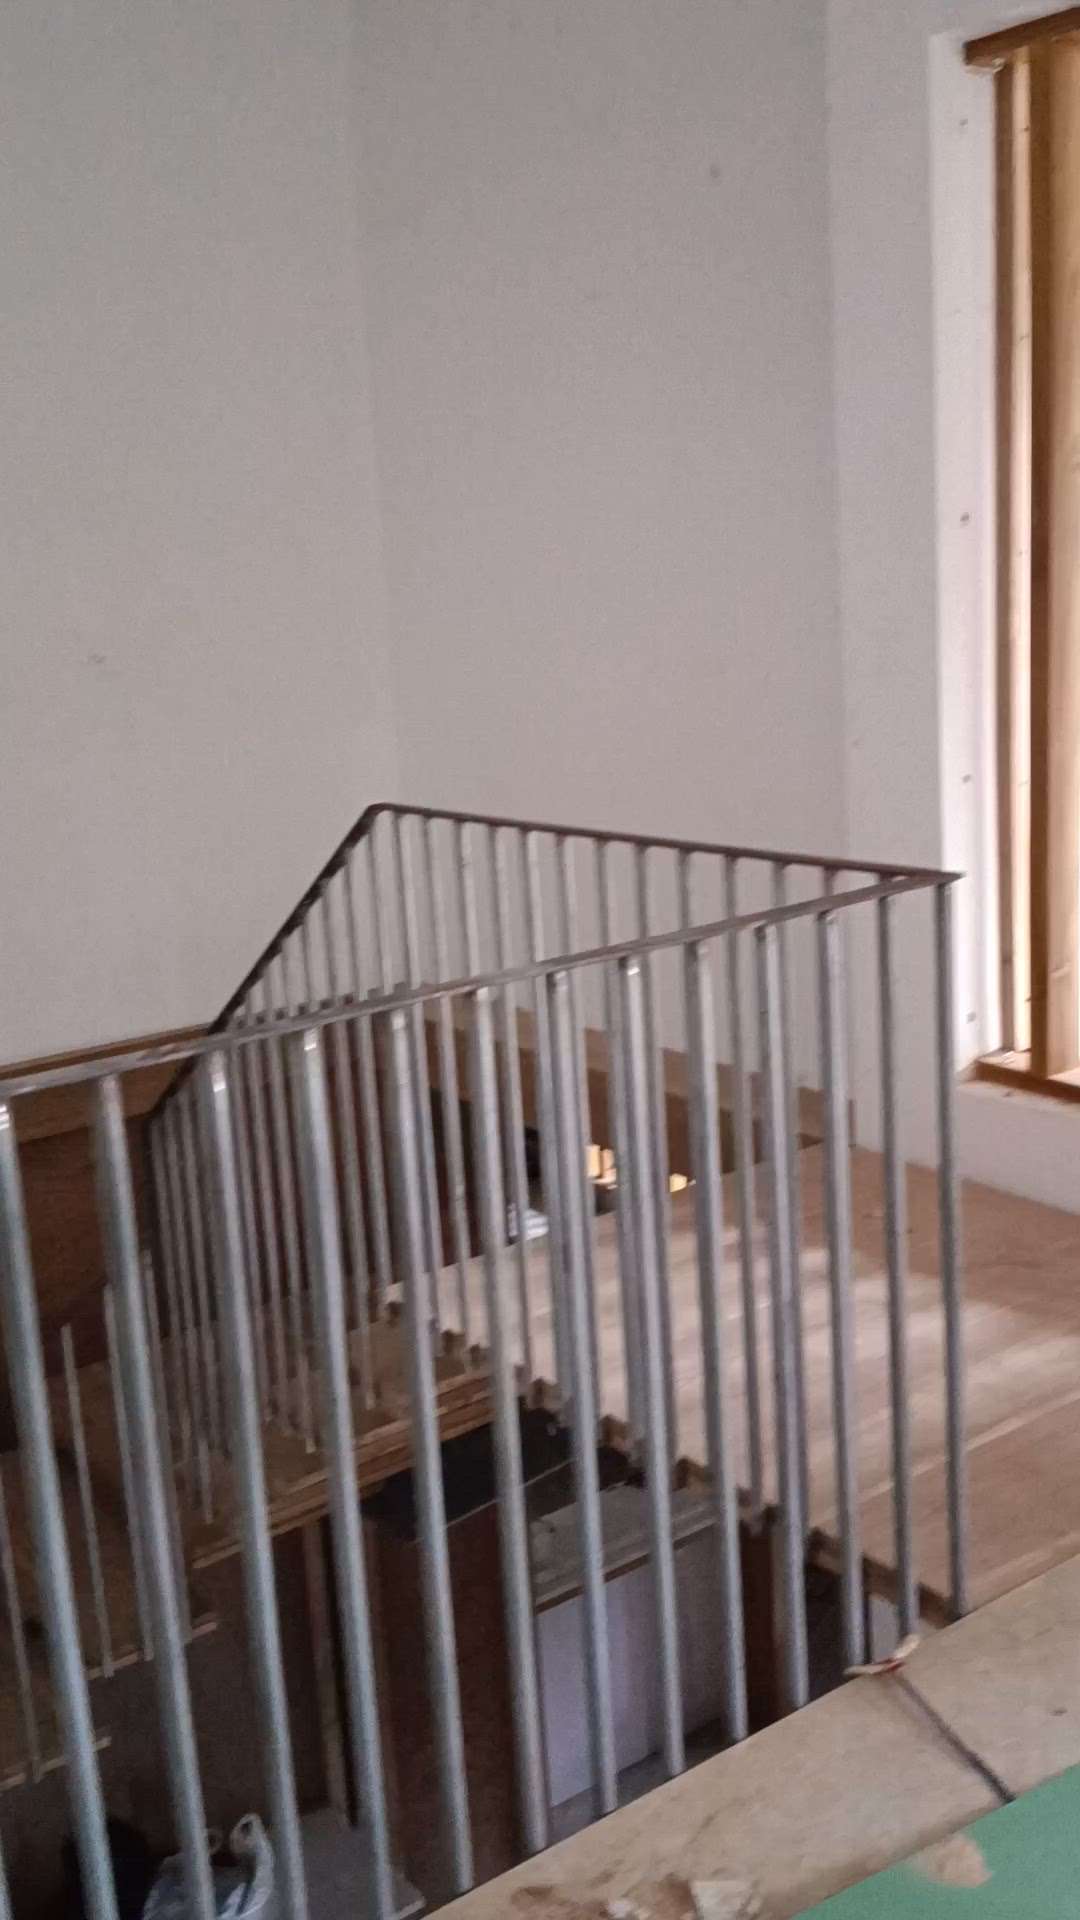 Steel staircase
 #Architectural&Interior
 #StaircaseDesigns
 #SteelStaircase